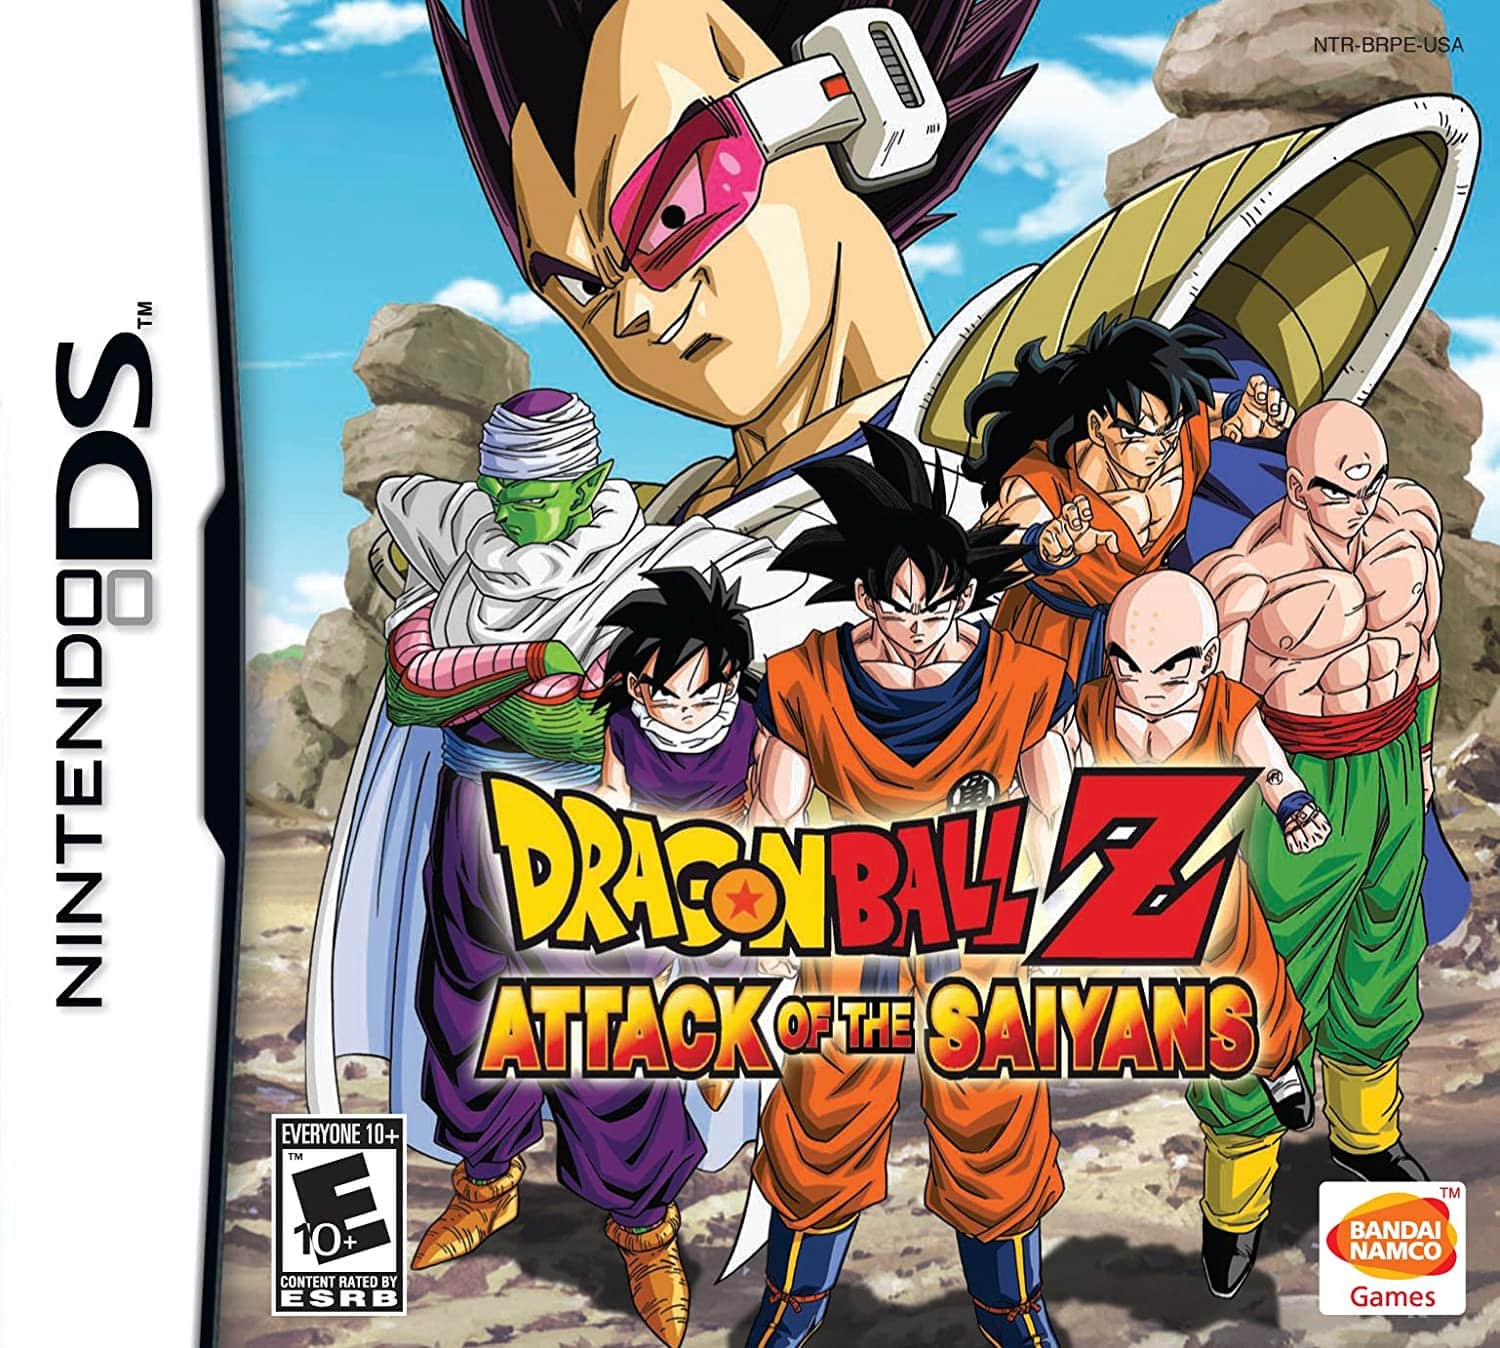 Dragon Ball Z: Attack of the Saiyans player count stats